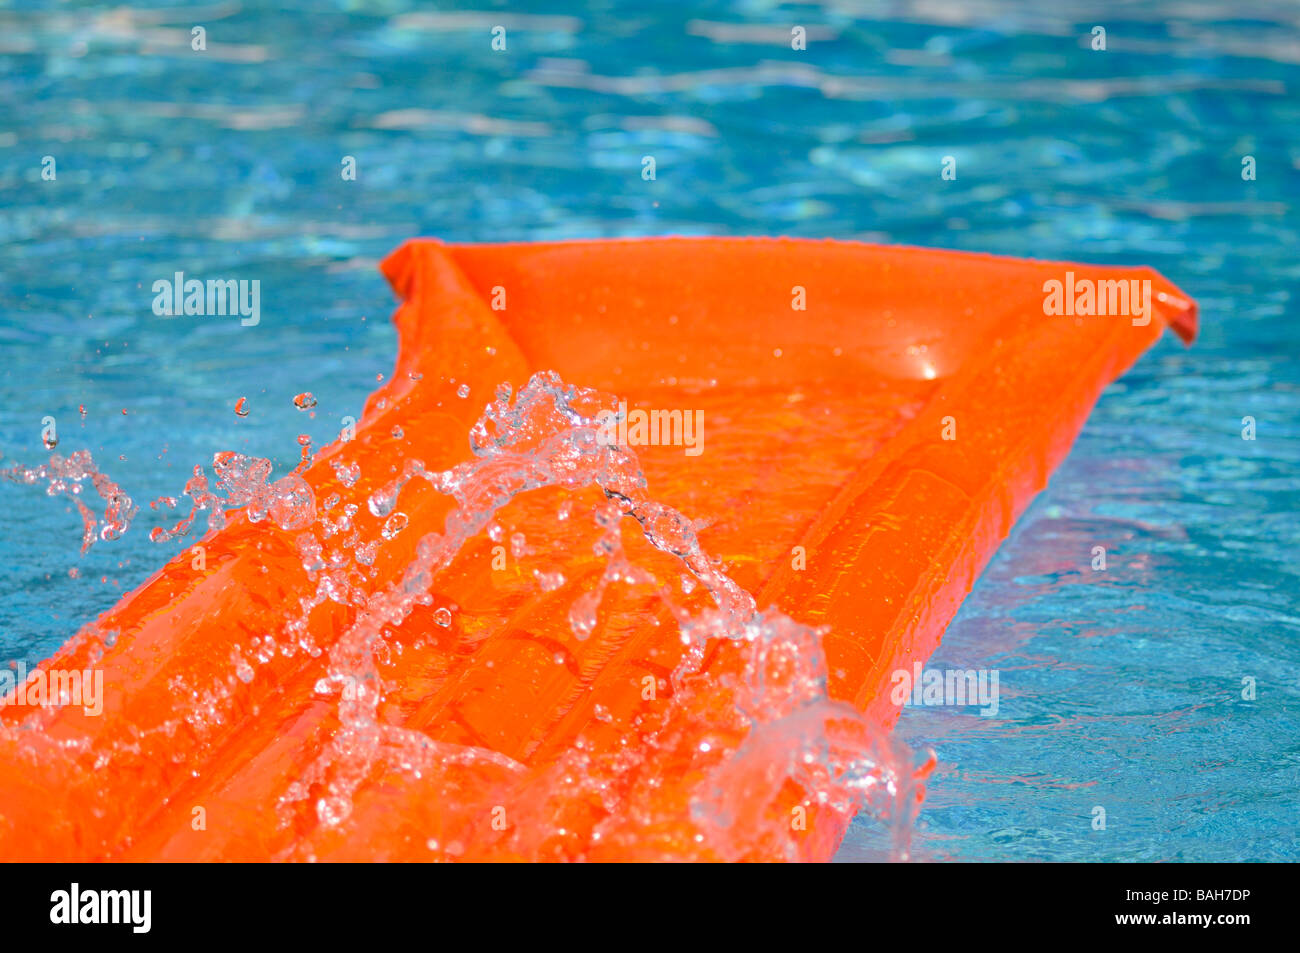 Splashed water over an orange air bed floating in a swimming pool. Stock Photo